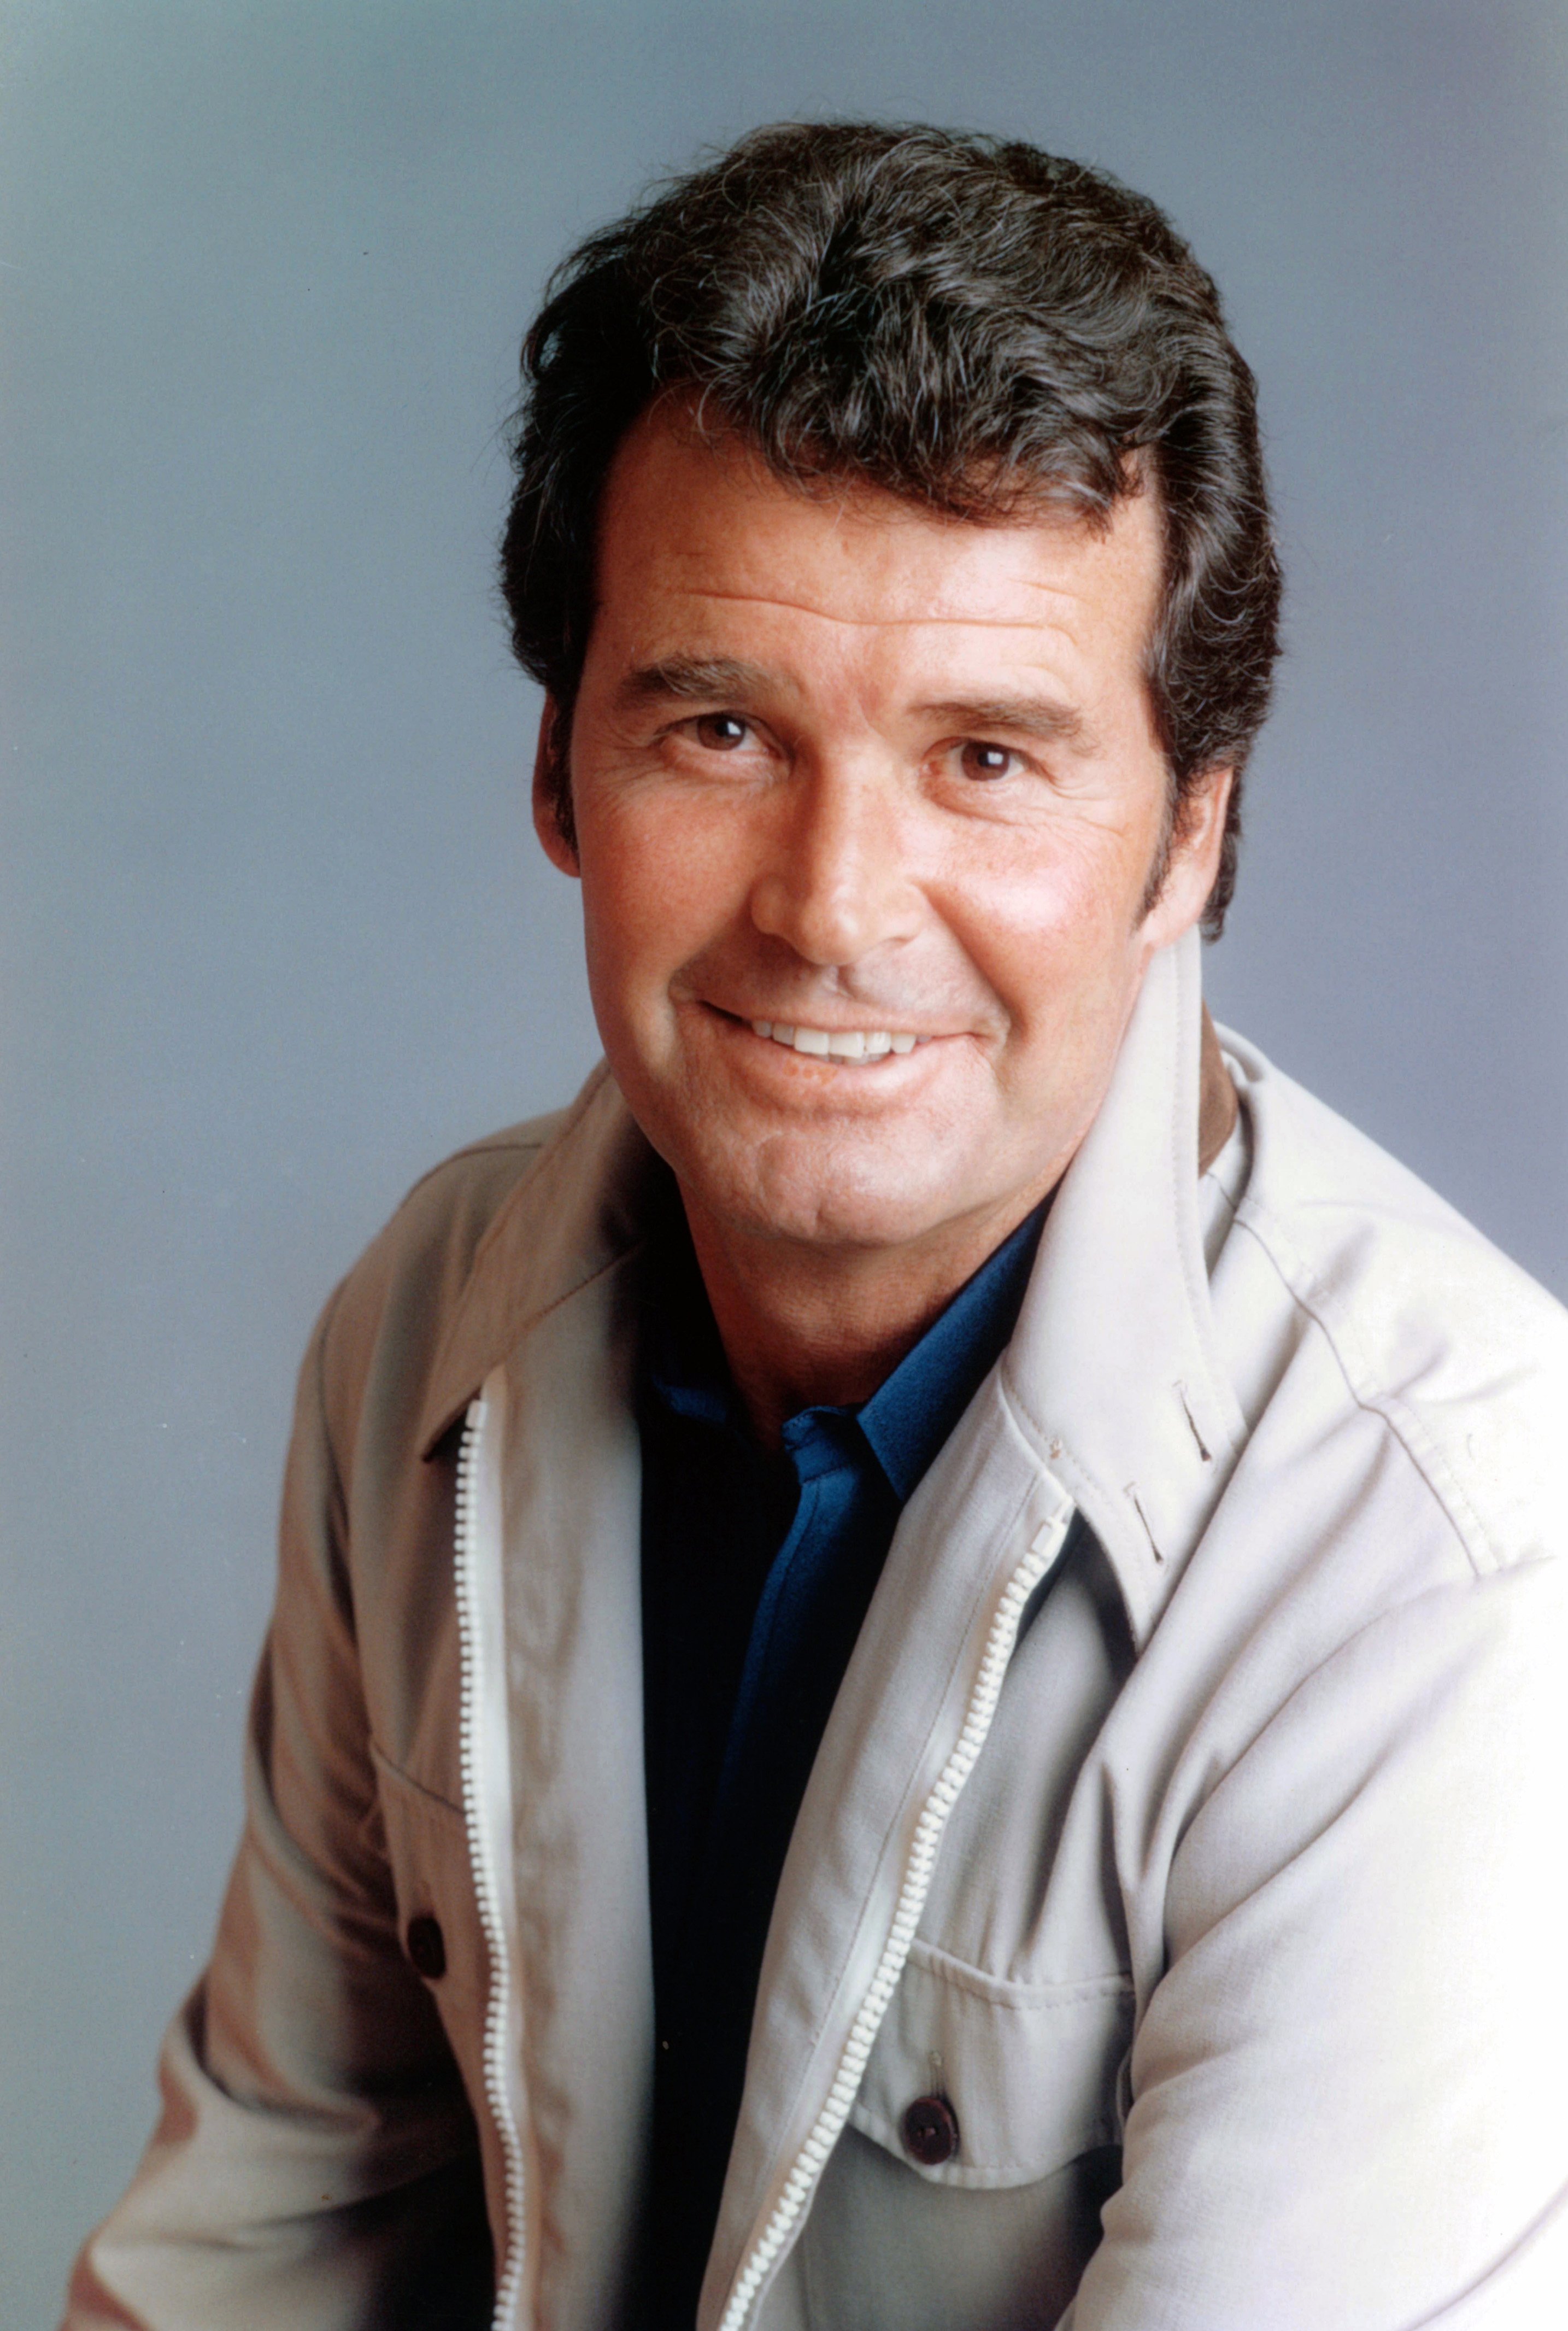 James Garner publicity portrait for the television series 'The Rockford Files', 1974. | Source: Getty Images